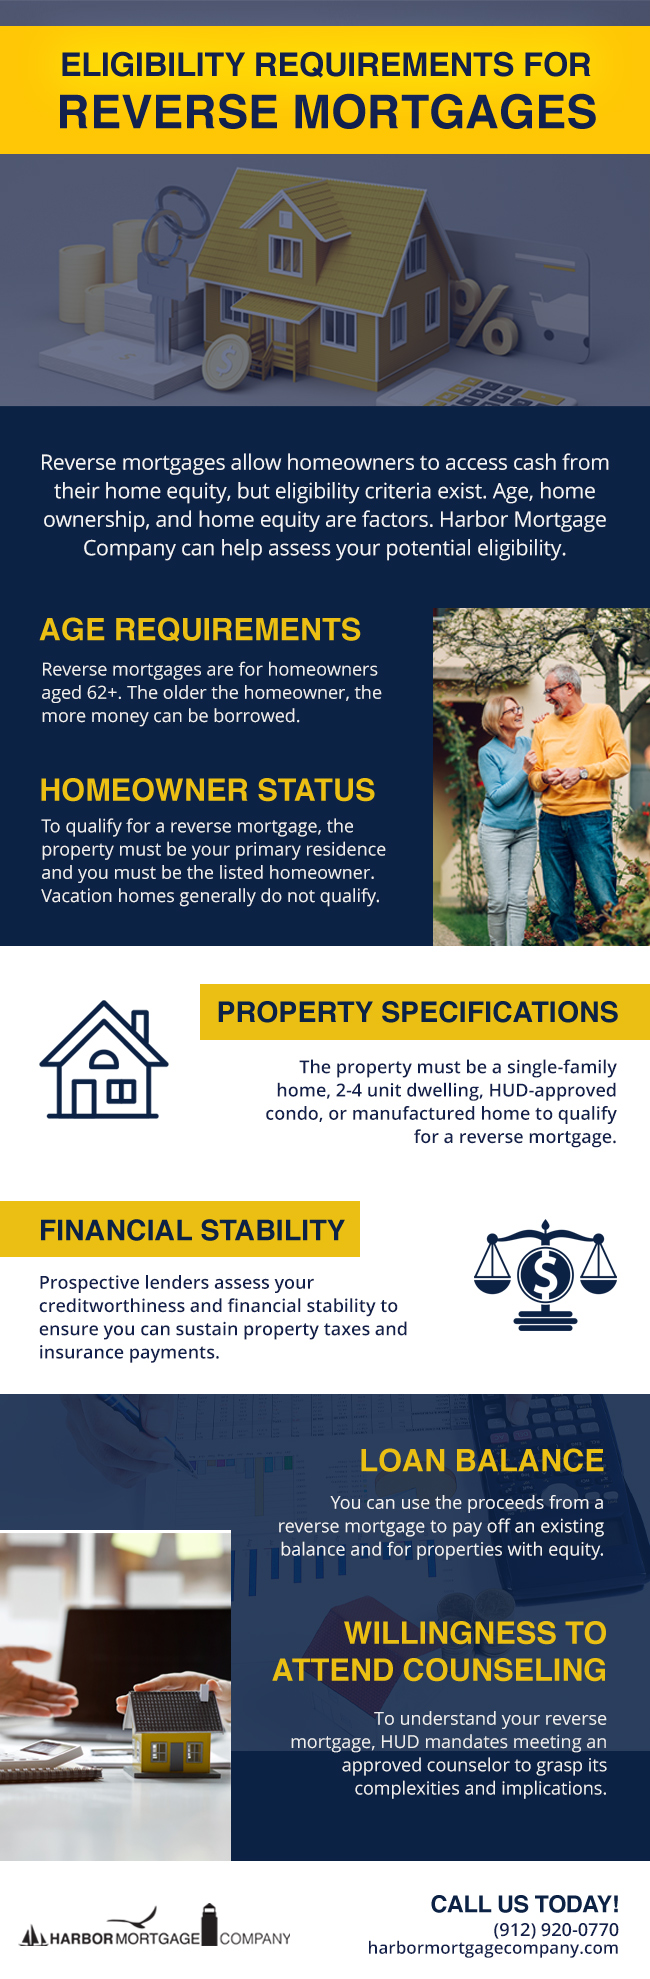 Eligibility Requirements for Reverse Mortgages